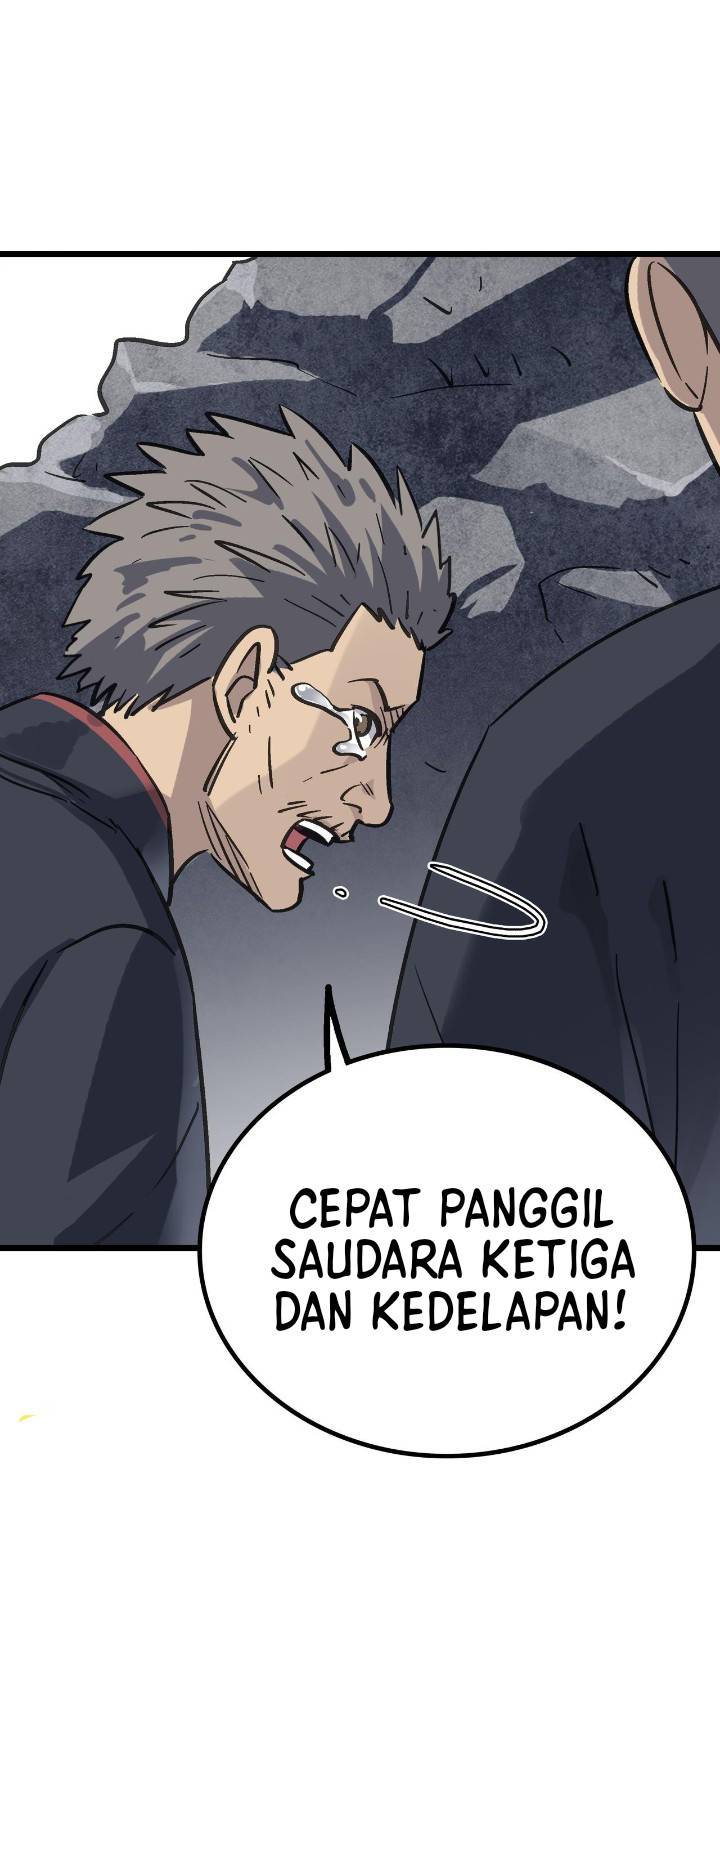 Dilarang COPAS - situs resmi www.mangacanblog.com - Komik building the strongest shaolin temple in another world 055 - chapter 55 56 Indonesia building the strongest shaolin temple in another world 055 - chapter 55 Terbaru 30|Baca Manga Komik Indonesia|Mangacan